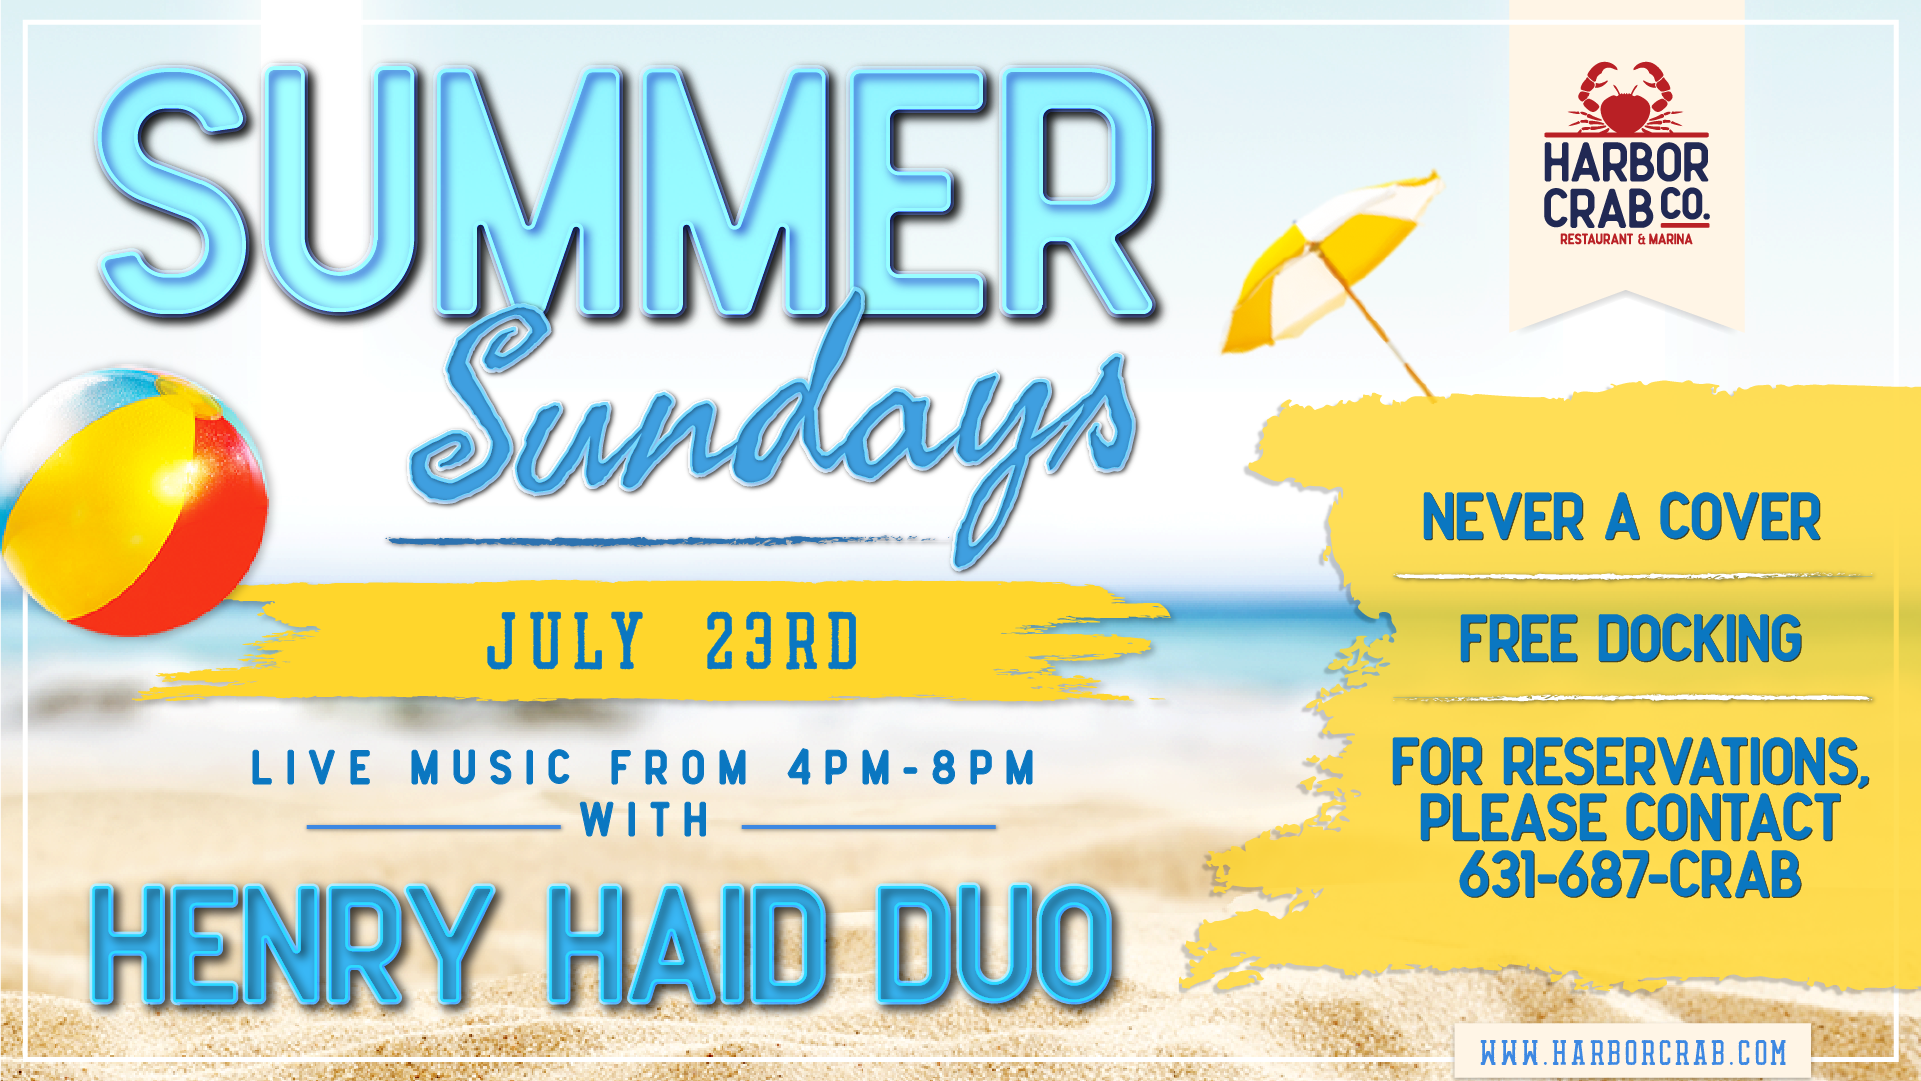 Summer Sunday with Henry Haid Duo on July 23rd at 4pm